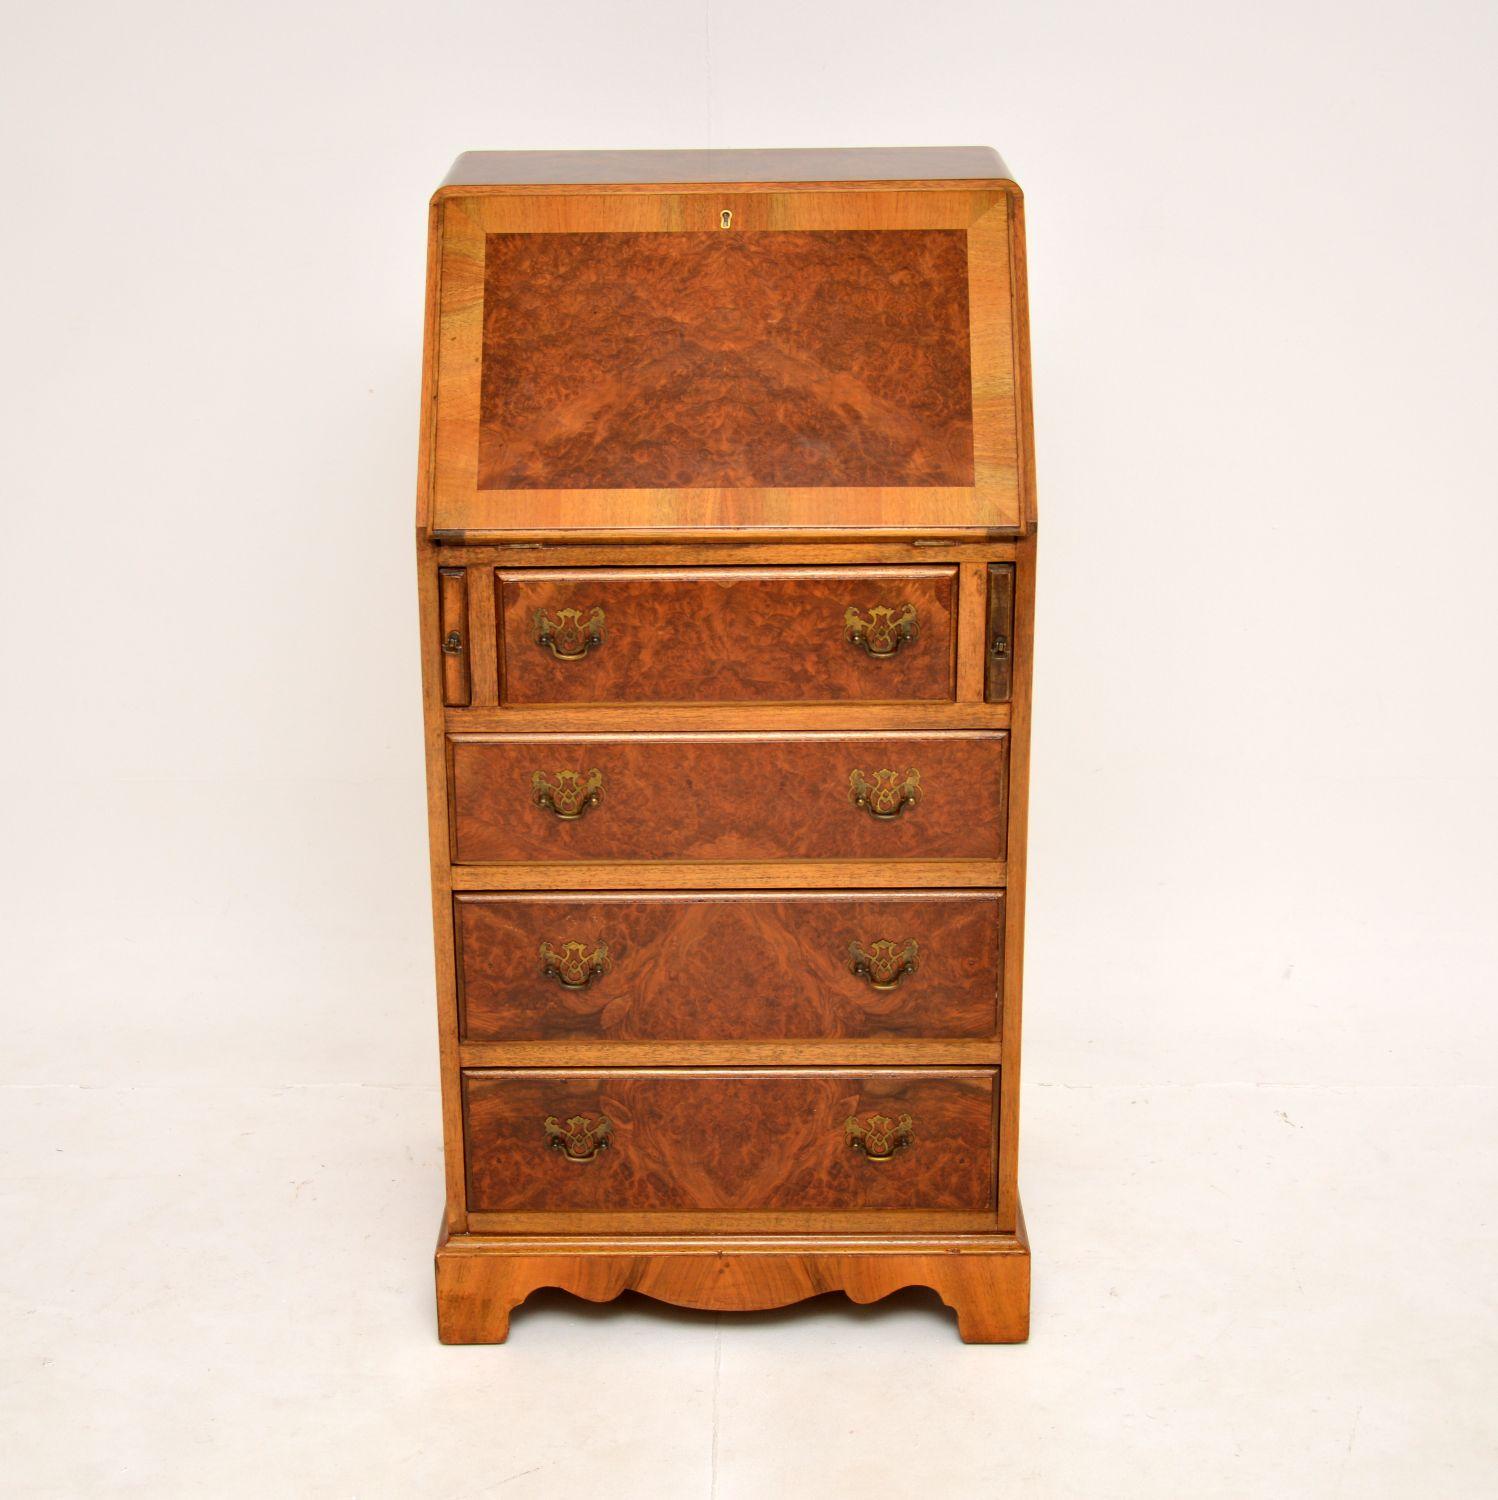 A wonderful antique burr walnut writing bureau in the Georgian style. This was made in England,it dates from around the 1930’s.

It is of great quality, with a very useful and practical design. It is slim and compact, with lots of storage space. The